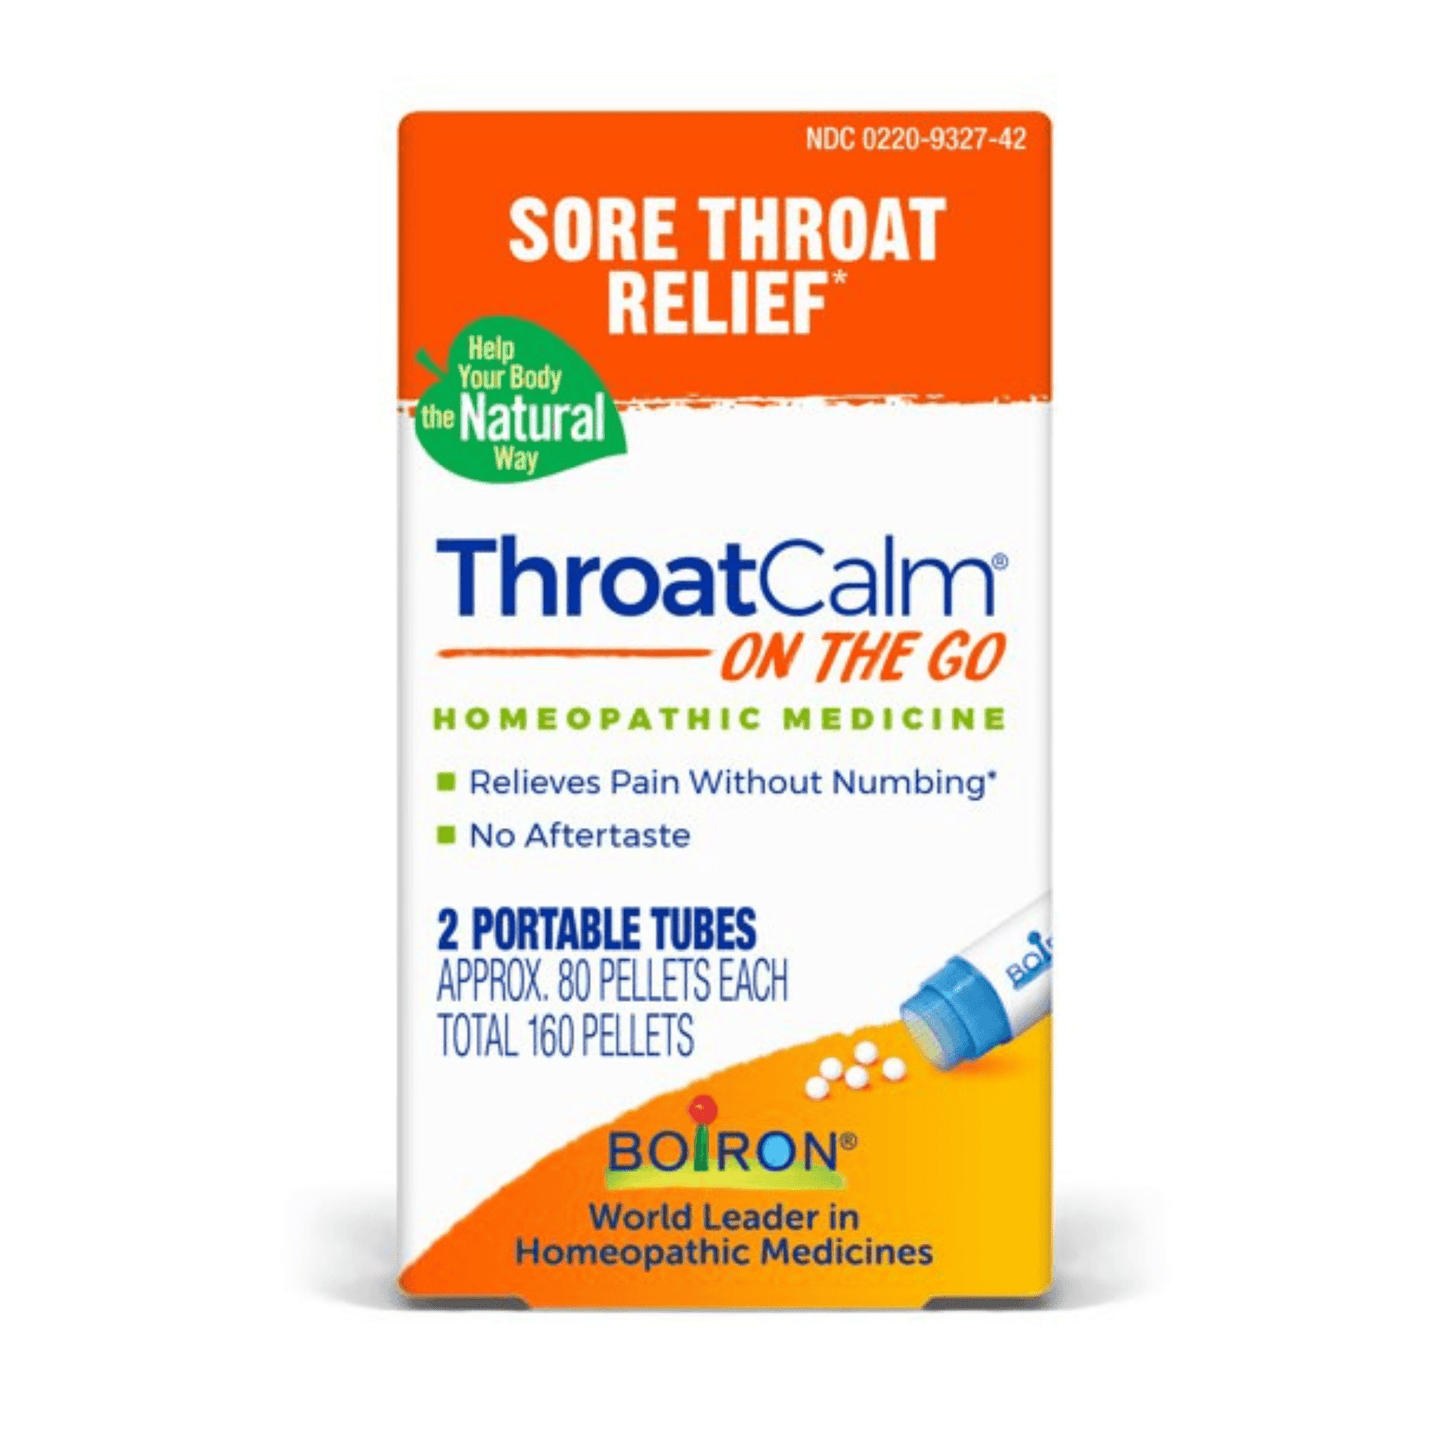 Primary Image of ThroatCalm On The Go